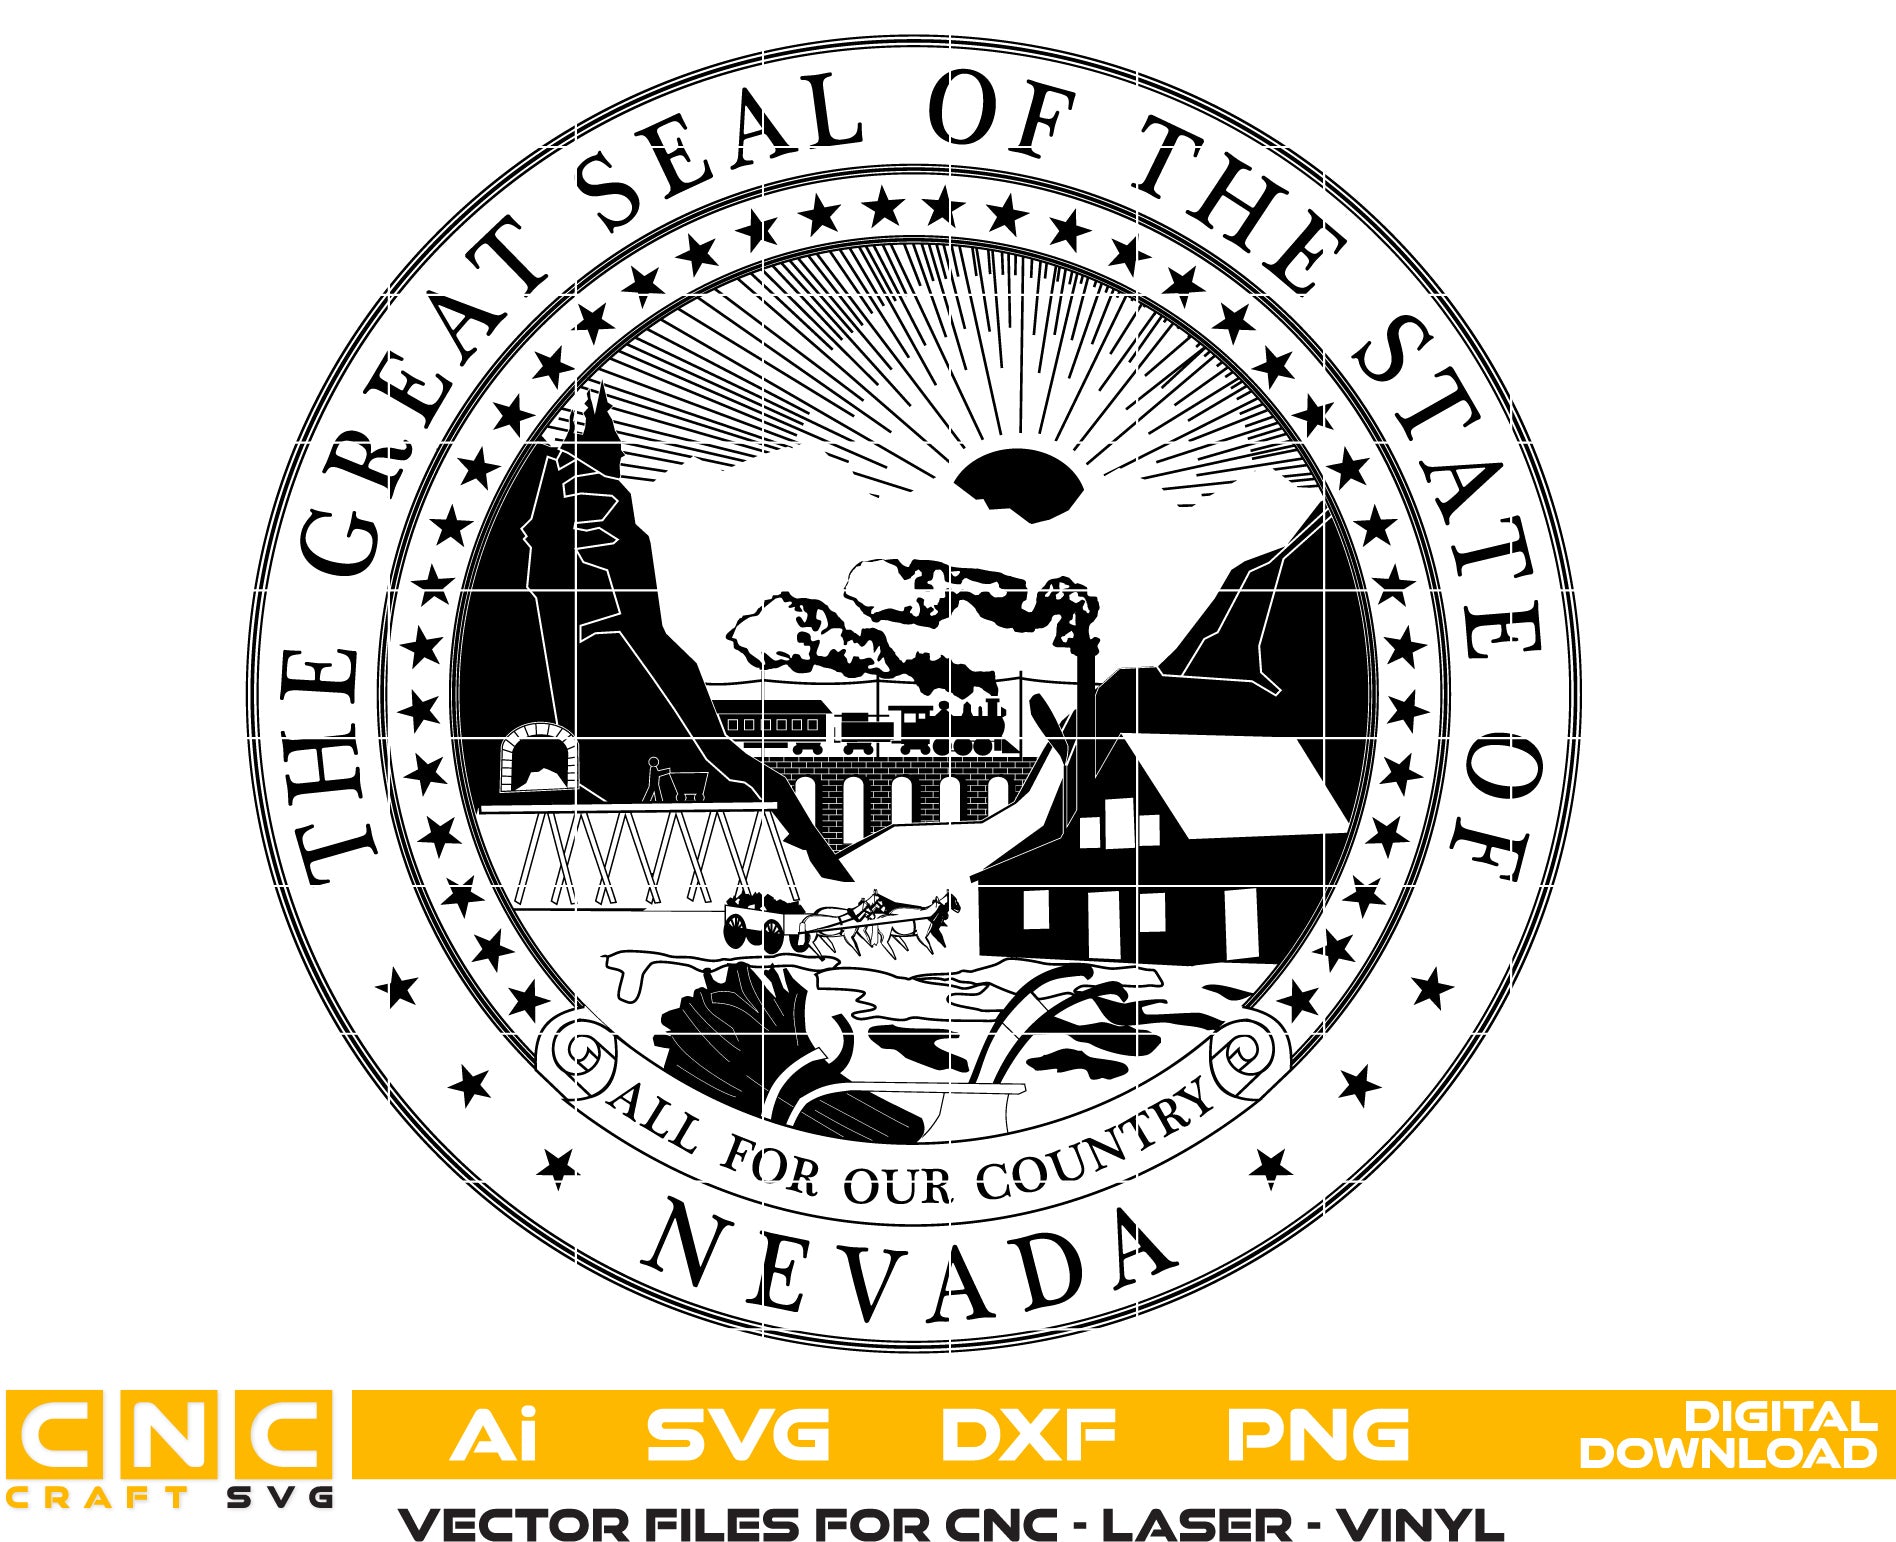 Great Seal of The State of Nevada Vector Art, Ai,SVG, DXF, PNG, Digital Files